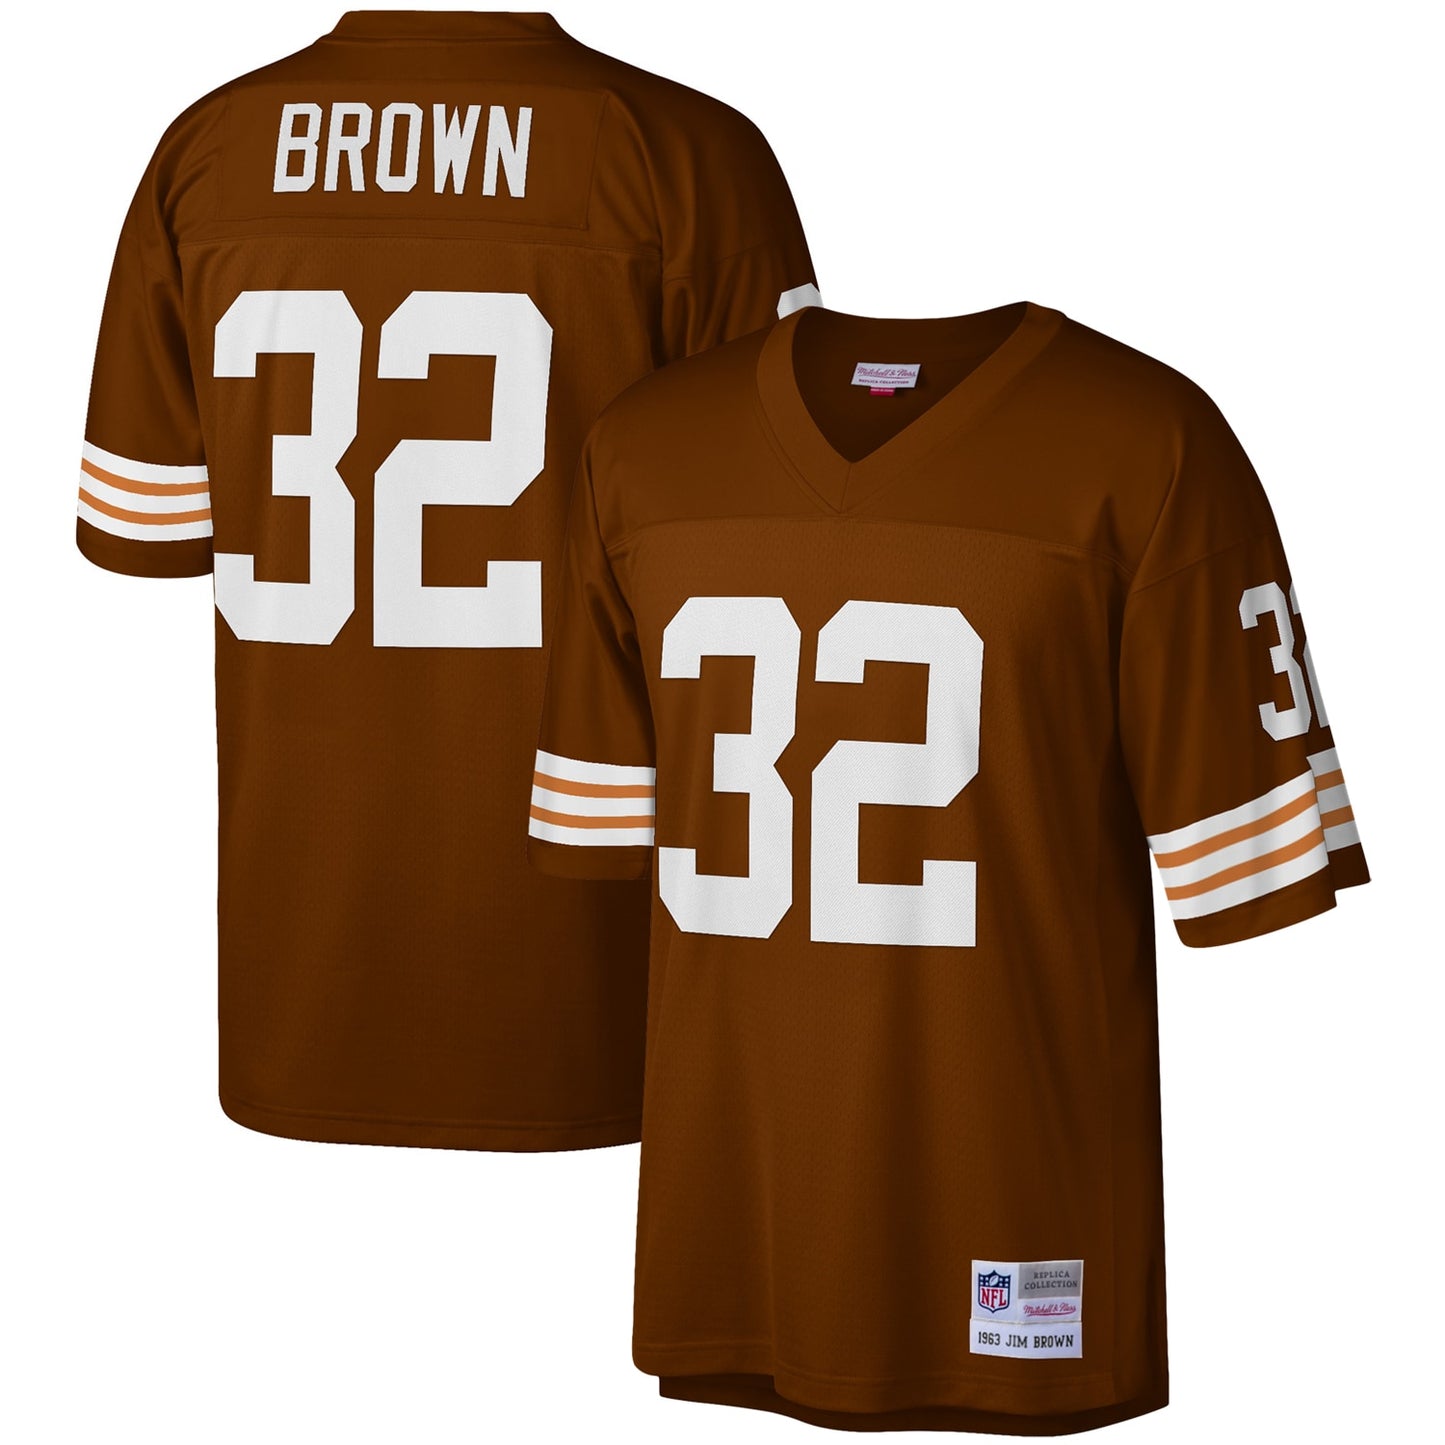 Jim Brown Cleveland Browns Mitchell & Ness Legacy Replica Jersey - Brown